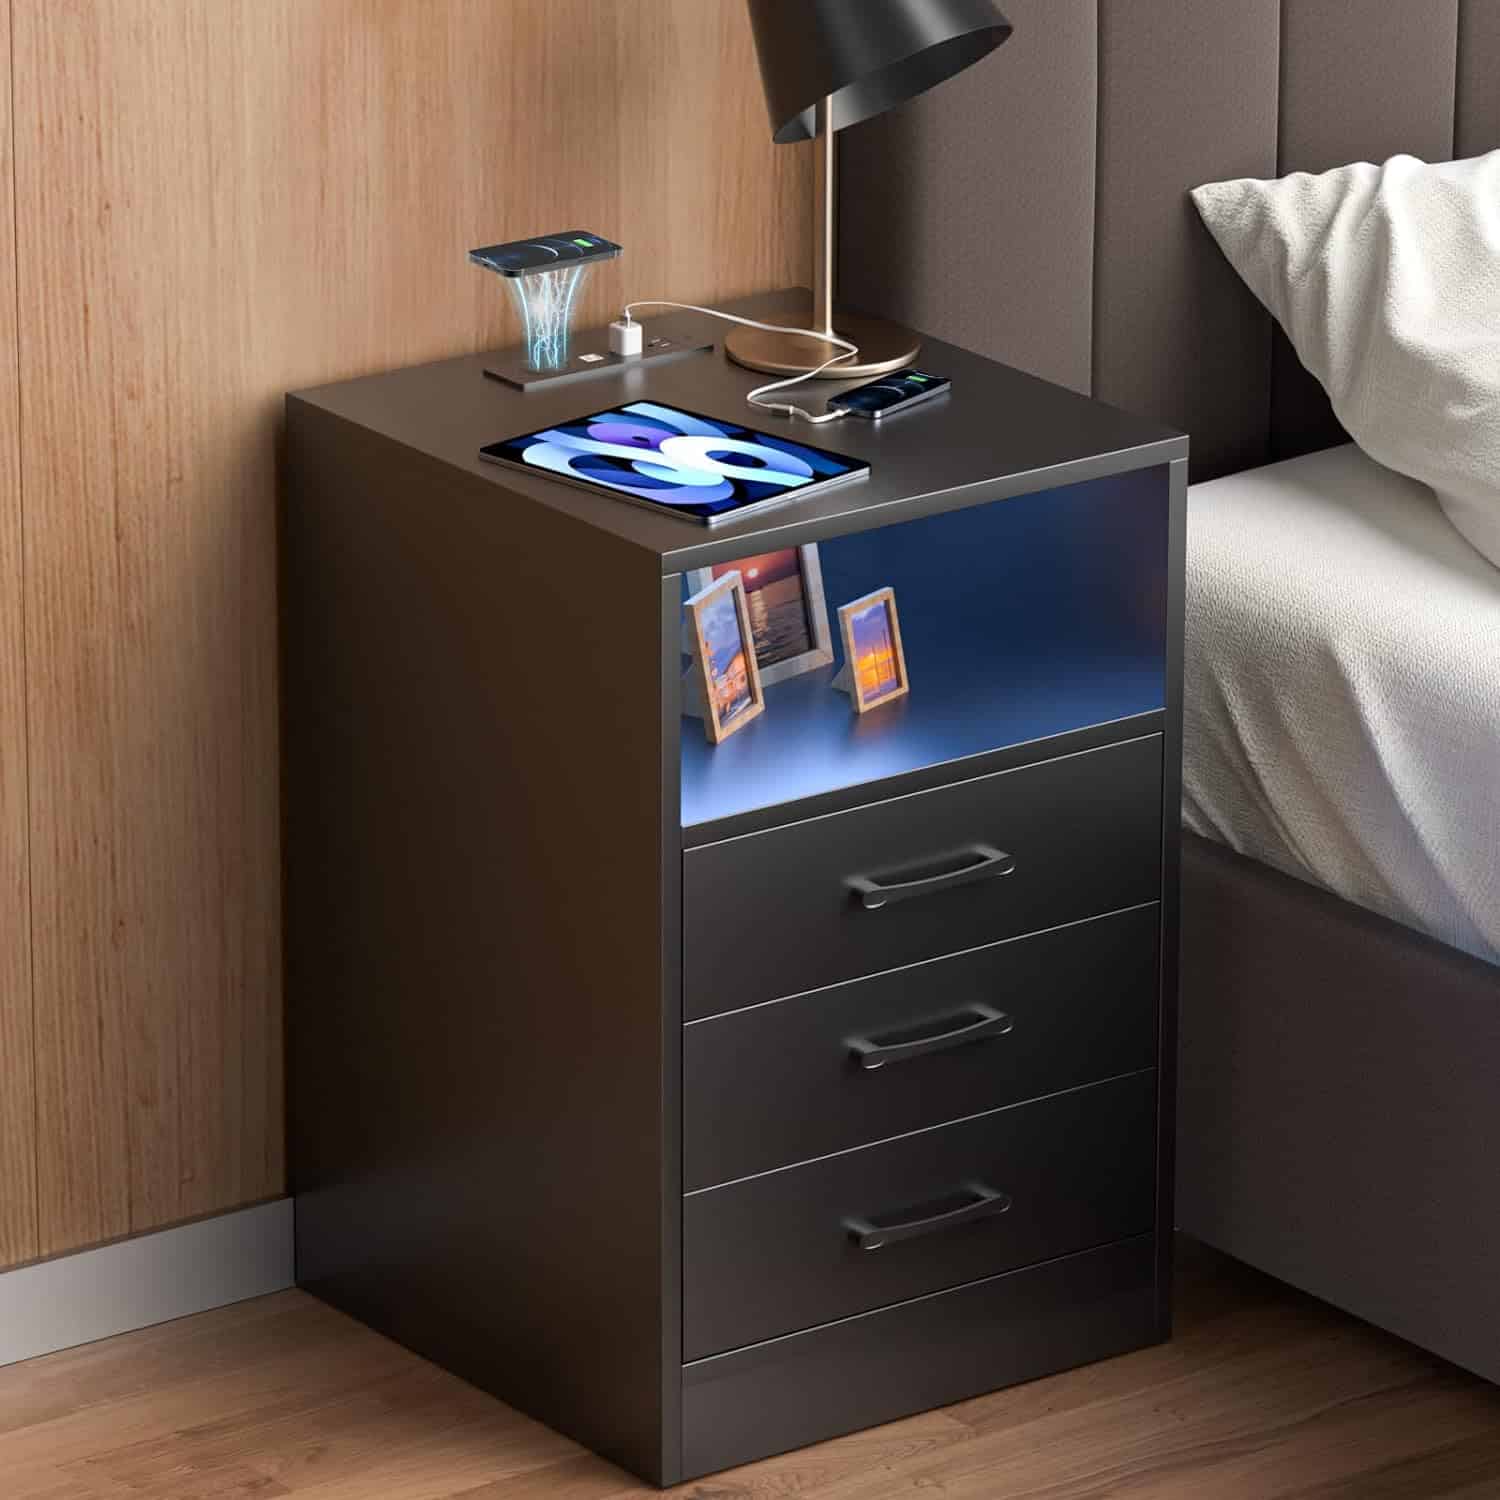 LUXFFY LED Nightstand with Wireless Charging Stations